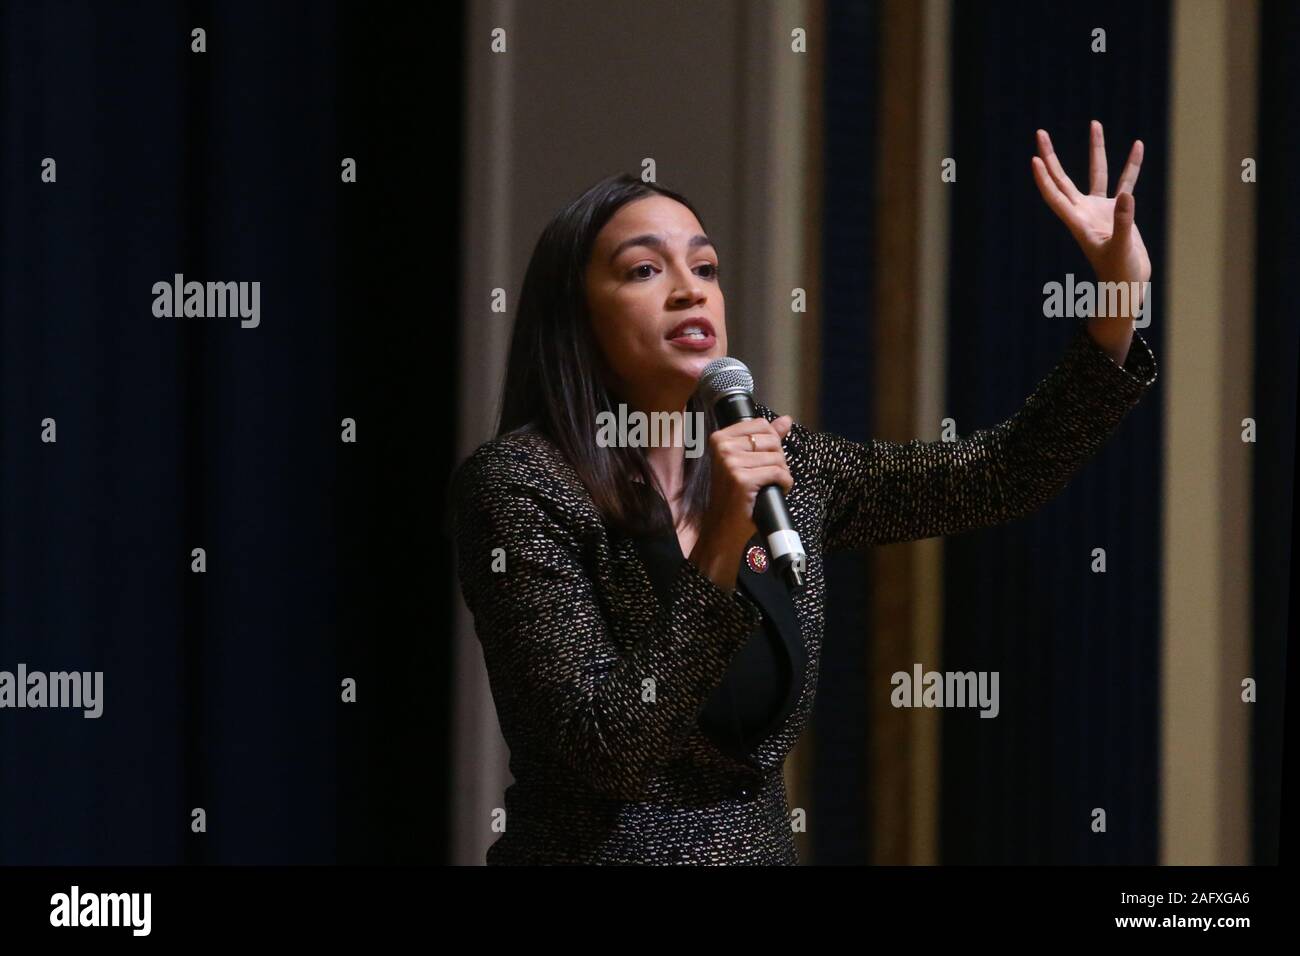 December 17, 2019, New York, NY, USA: Dec 14, 2019 : Alexandria Ocasio-Cortez held a town hall at P.S. 150 which is at 40-01 43rd Ave, in  Sunnyside, Queens. ...NY DAILIES OUT! (Credit Image: © Dan Herrick/ZUMA Wire) Stock Photo